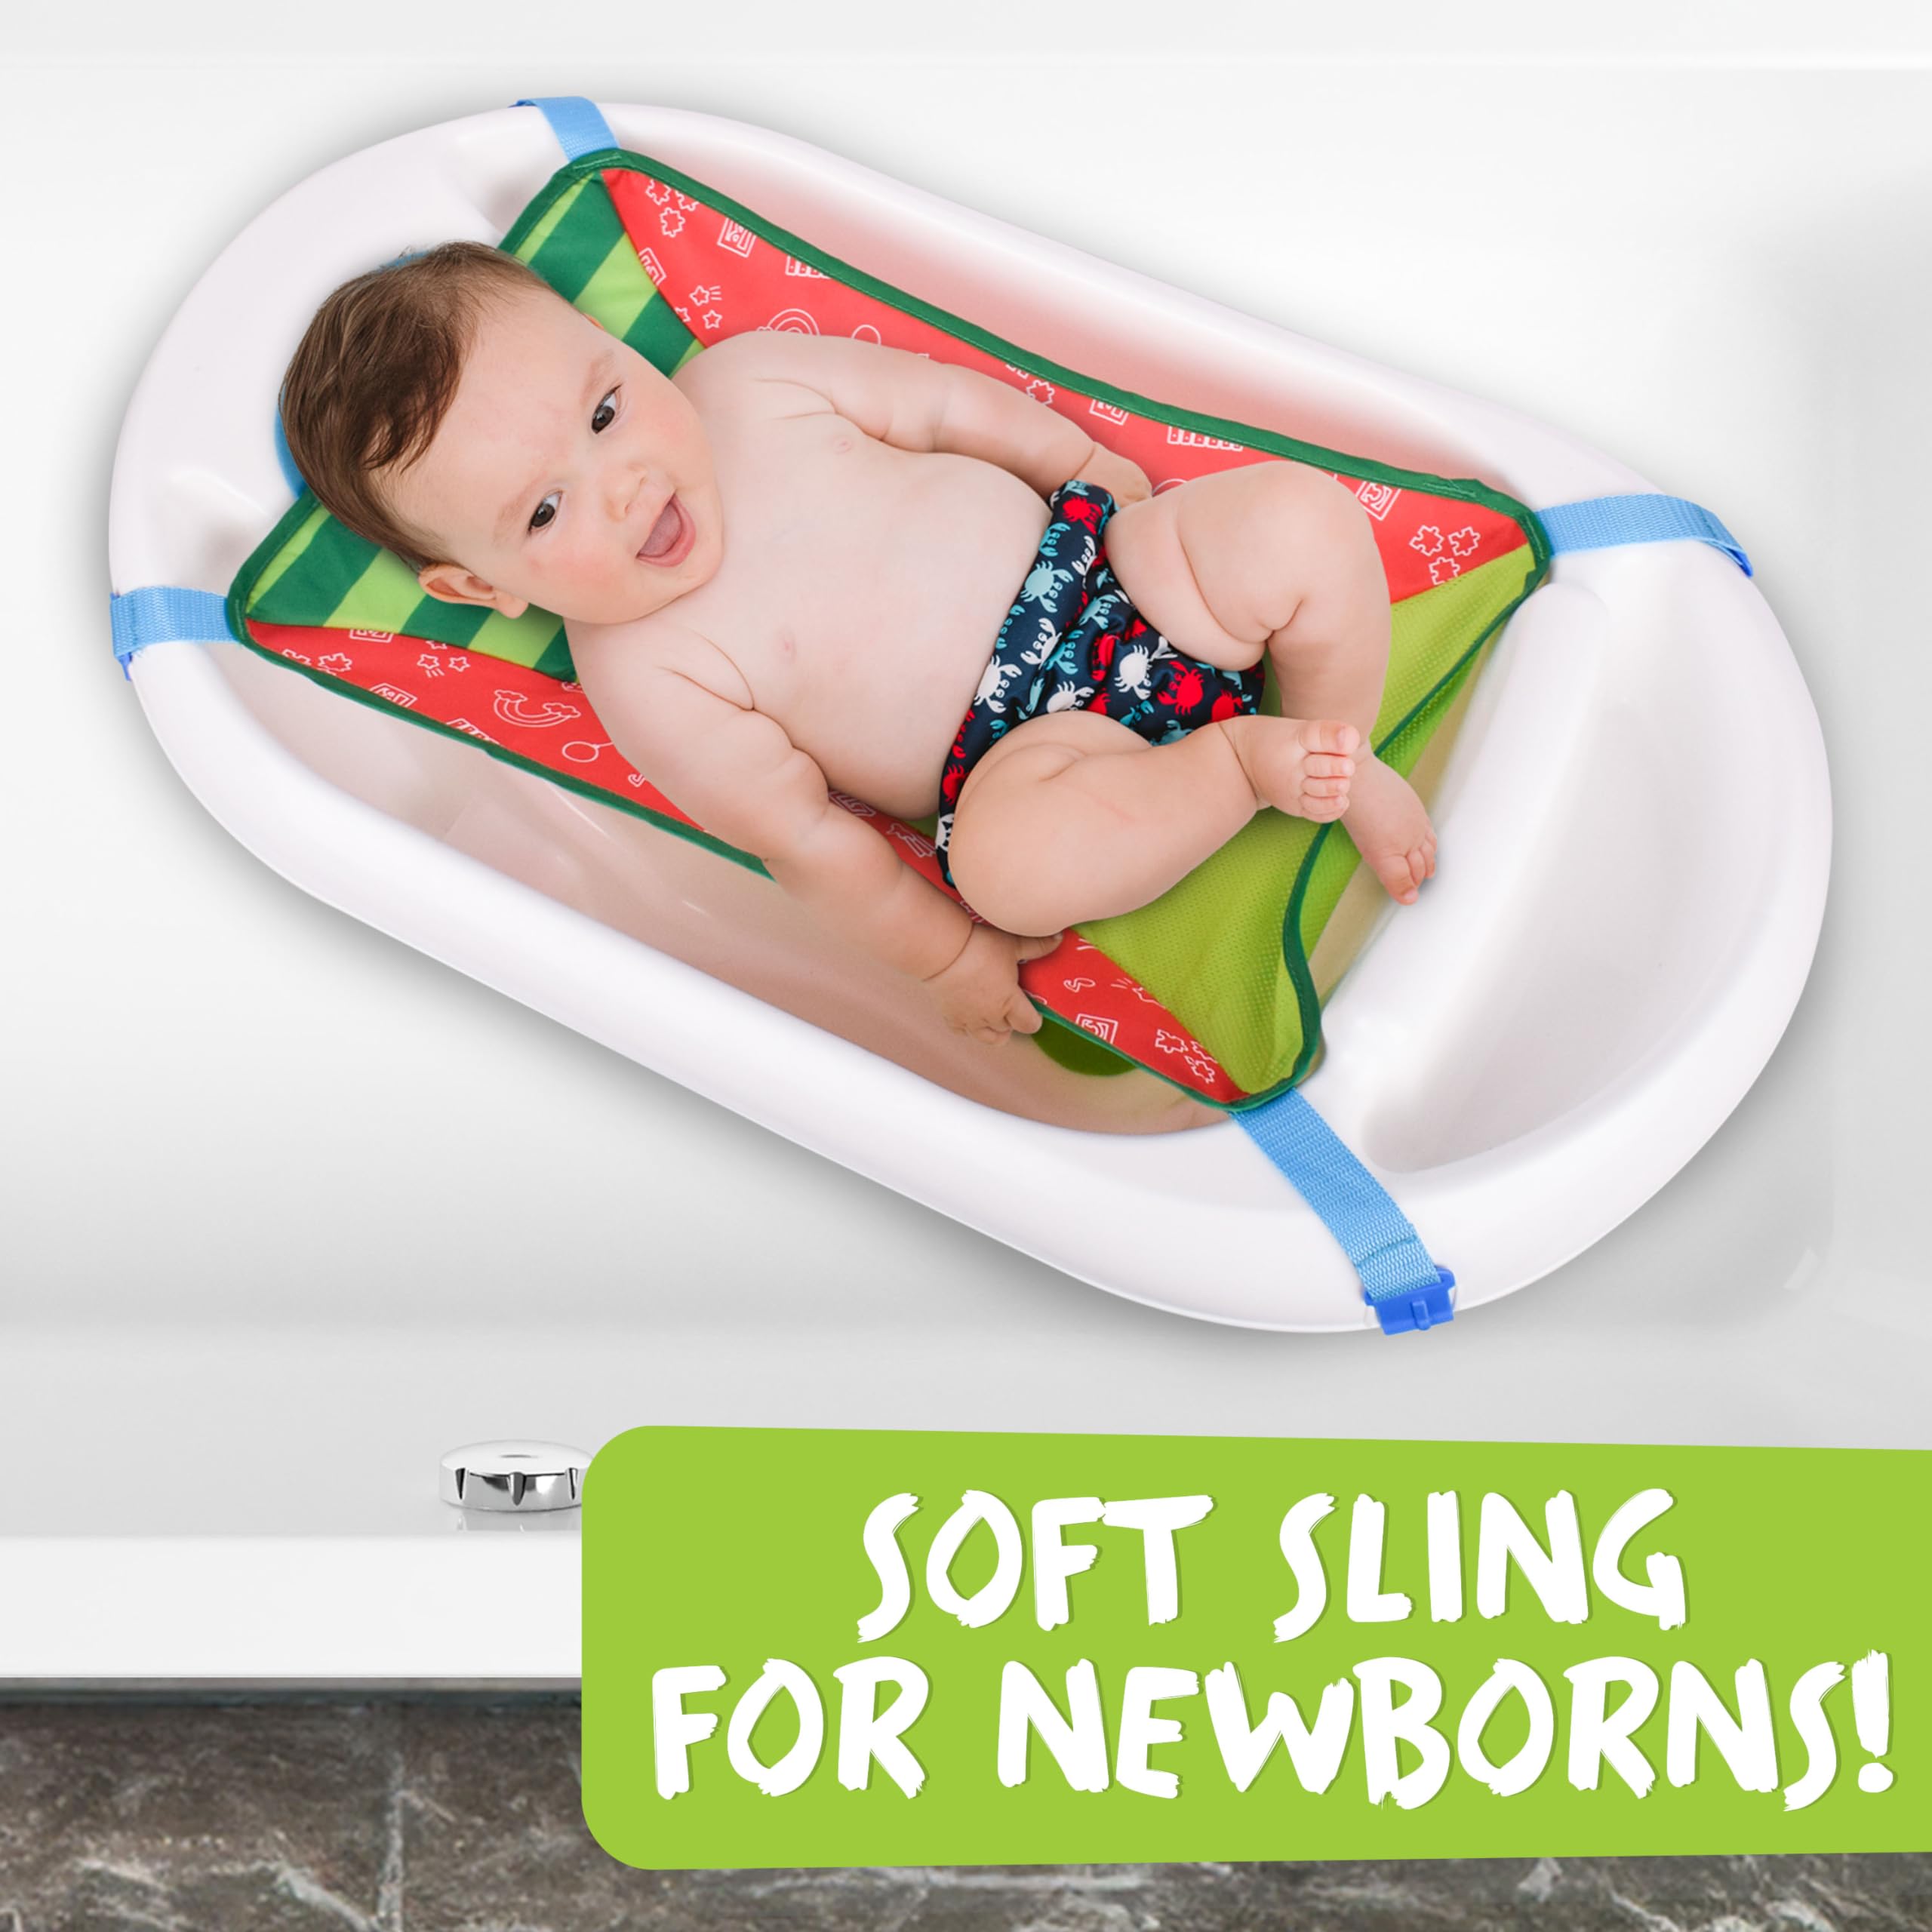 CoComelon Official Newborn to Toddler Bath - 3-in-1 Baby Bathtub with Removable Sling | Ages 0 to 24 Months | White Tub with Red and Green Sling - Sunny Days Entertainment